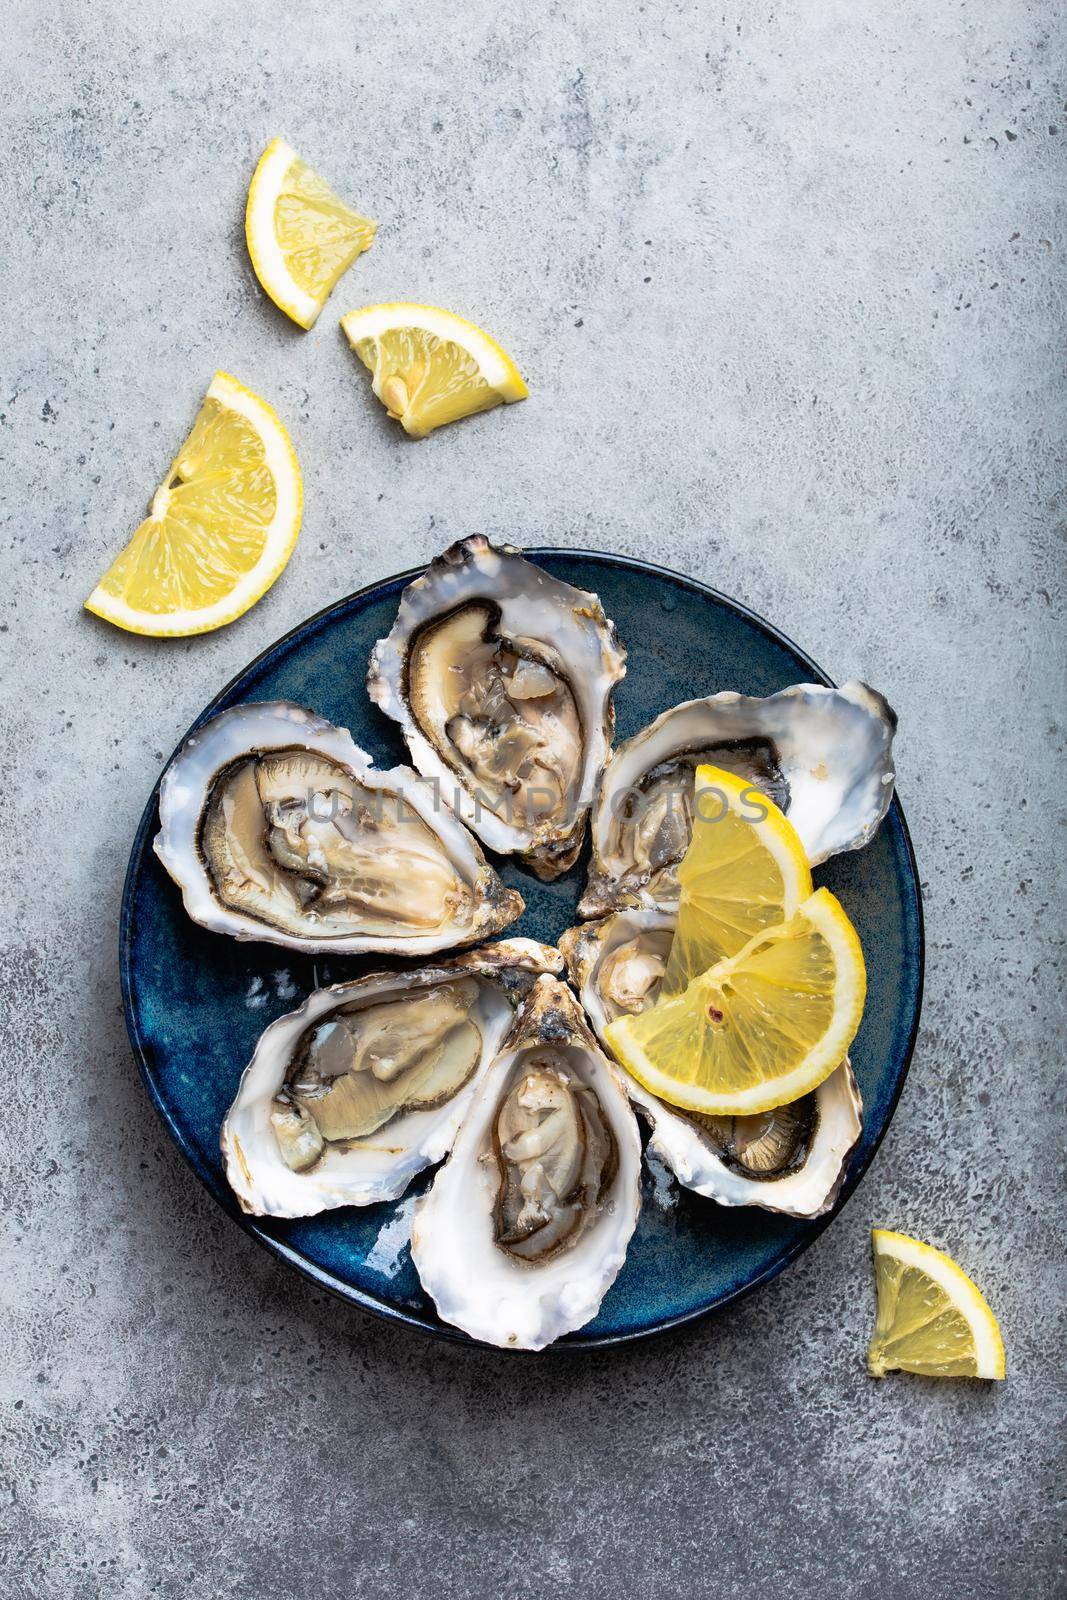 Set of half dozen fresh opened oysters in shell with lemon wedges served on rustic blue plate on gray stone background, close up, top view